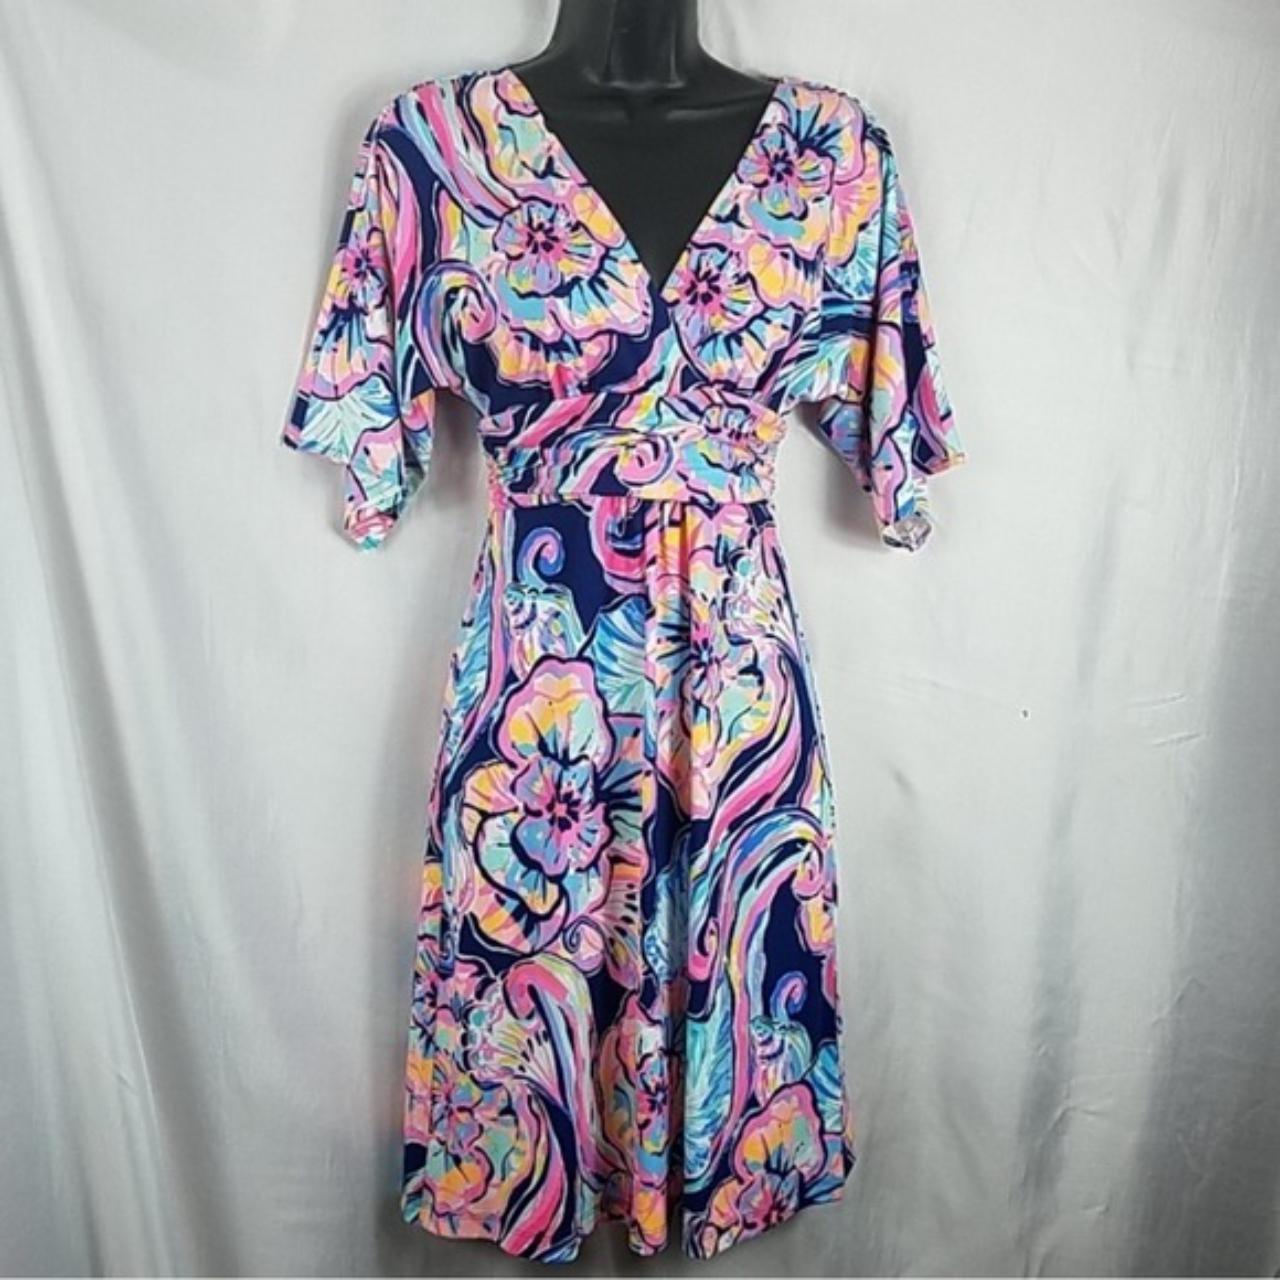 Lilly Pulitzer Women's Pink and Navy Dress